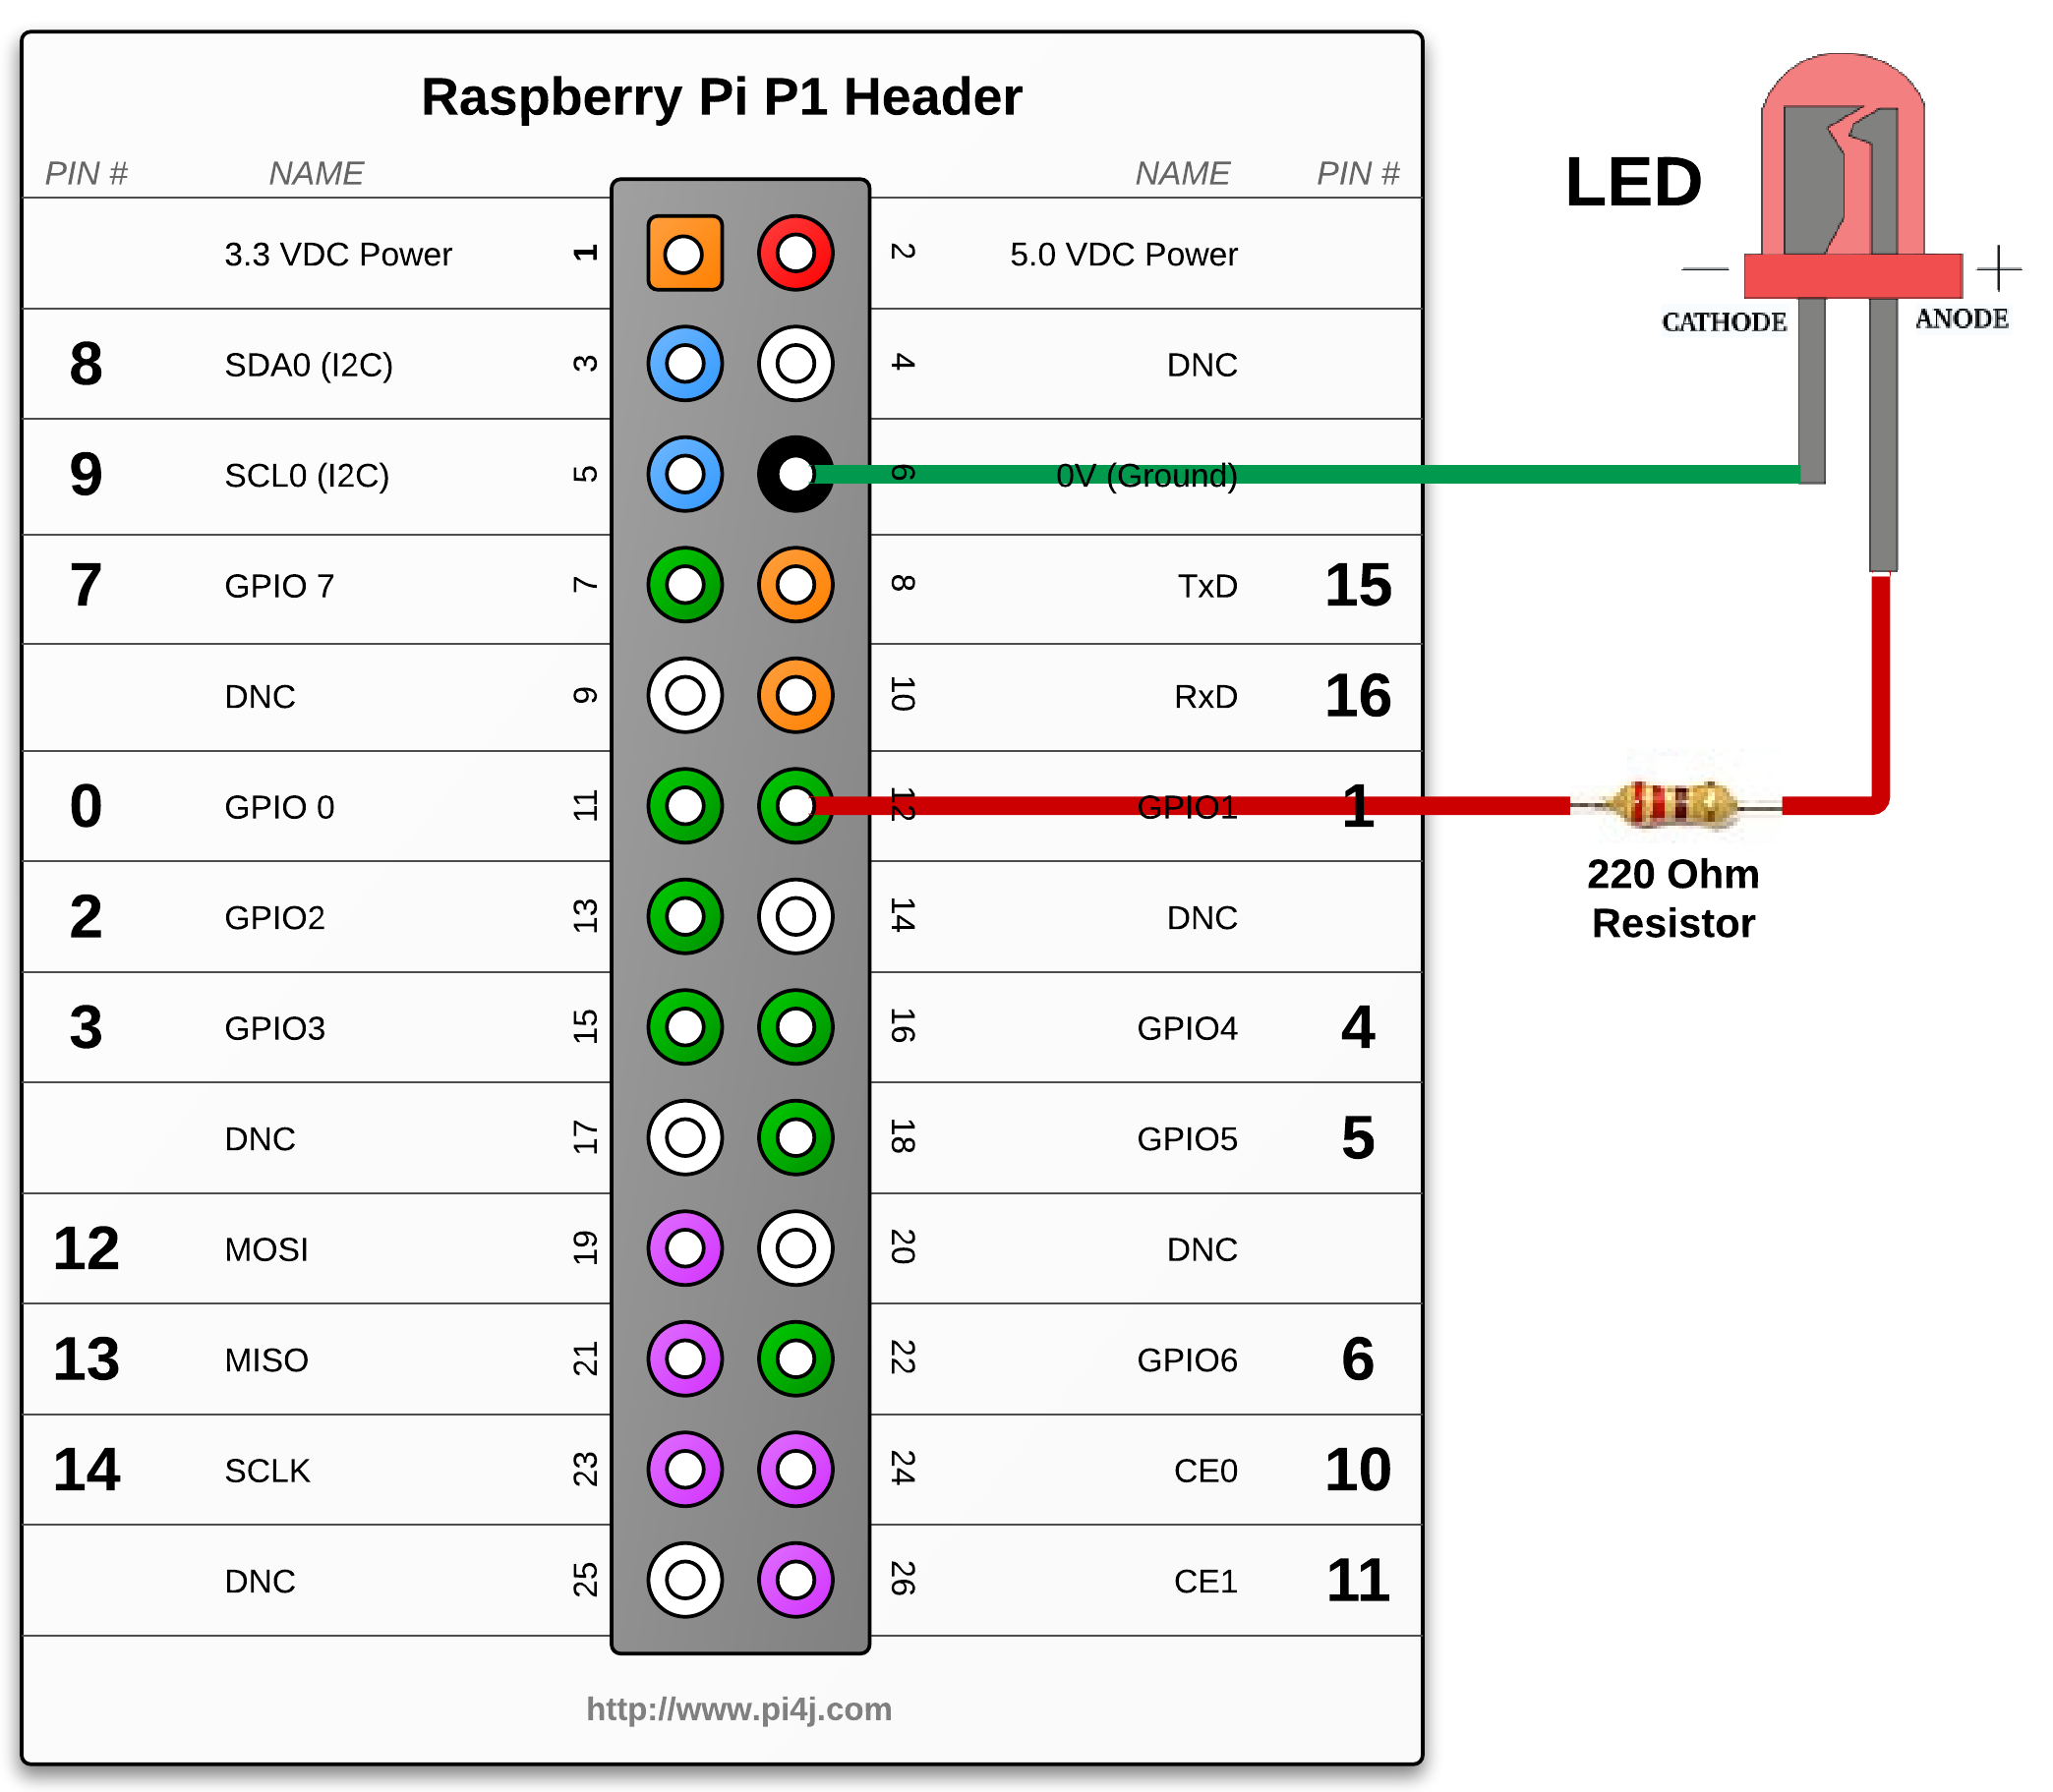 The Pi4j Project Control Example